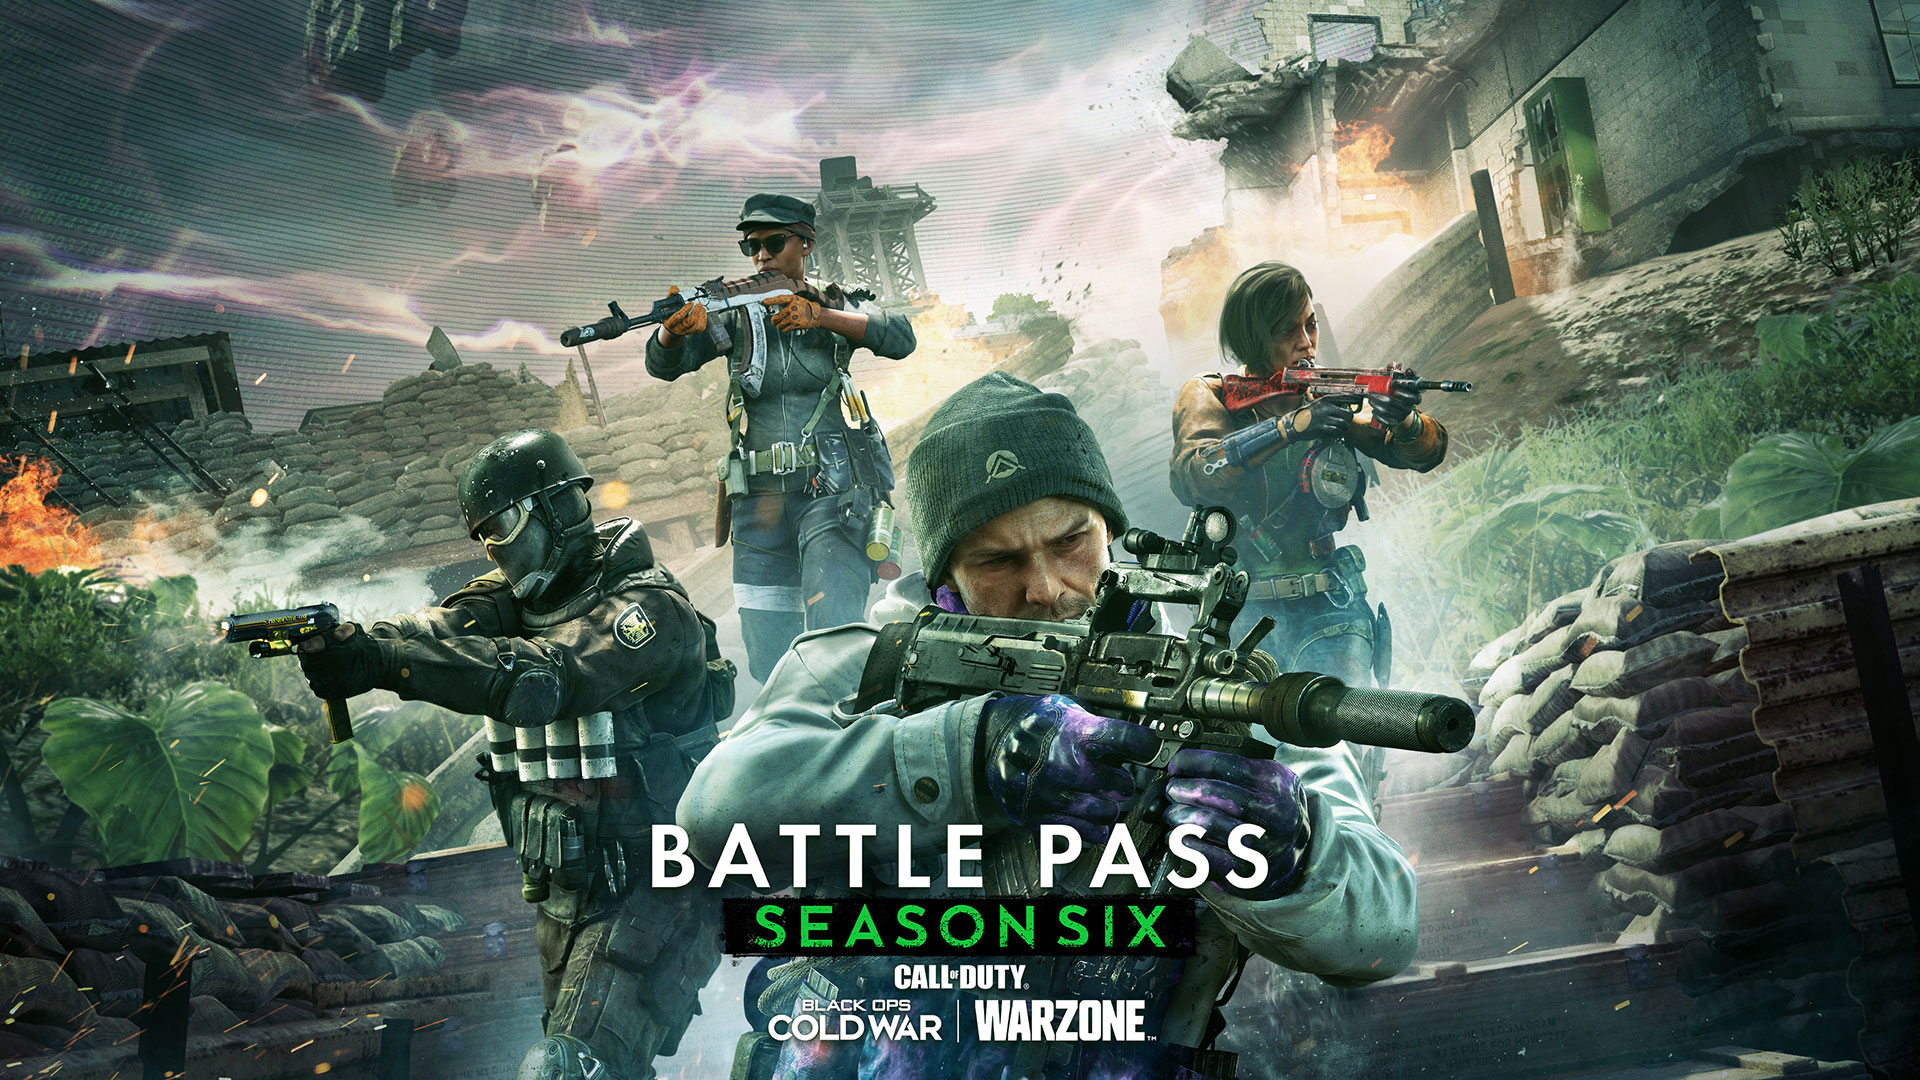 Warzone 2 Battle Pass Price, Unlocks, And More! - Insider Gaming